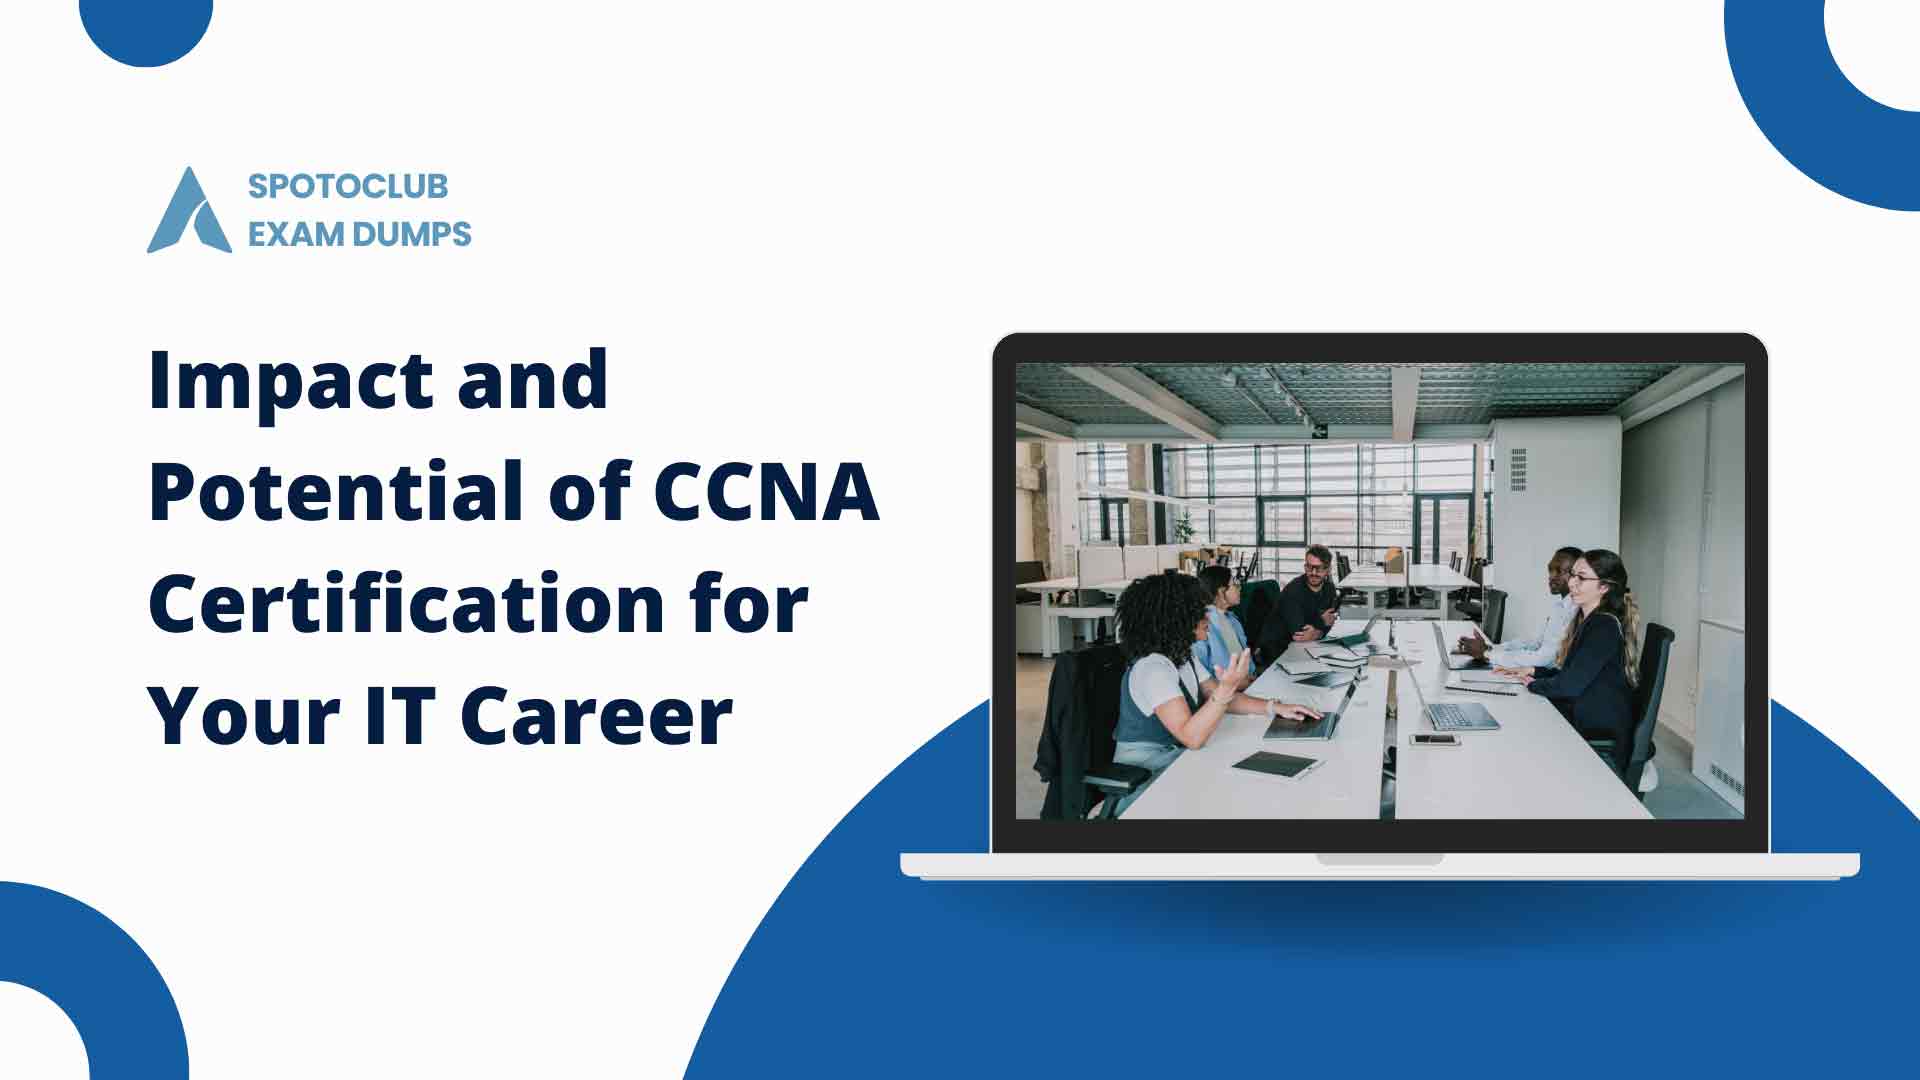 Impact and Potential of CCNA Certification for Your IT Career